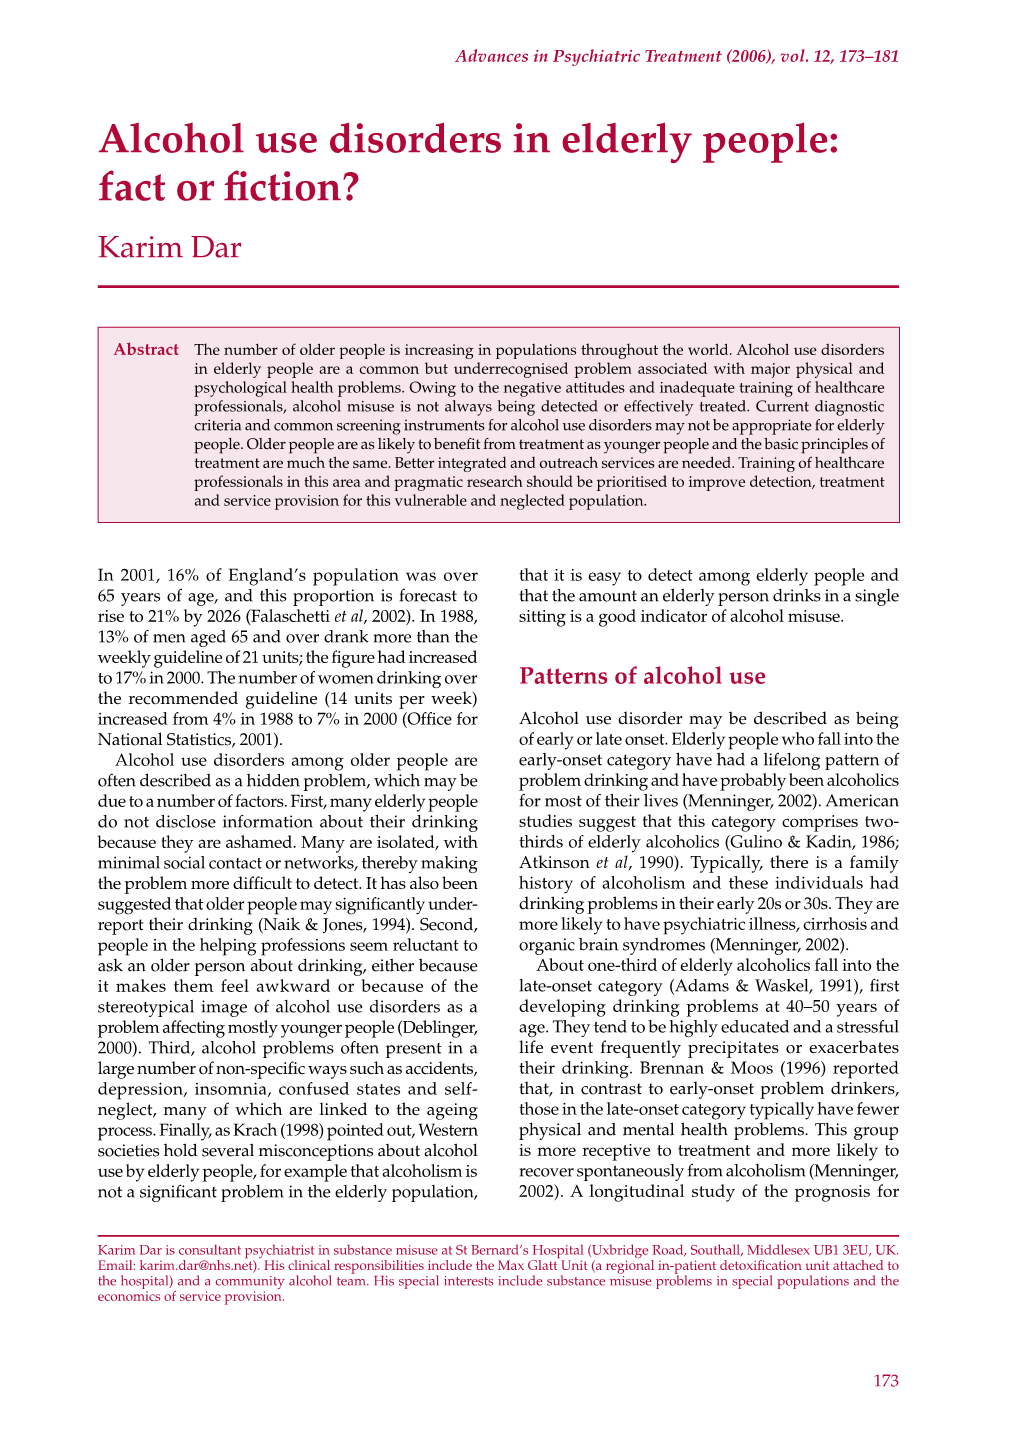 Alcohol Use Disorders in Elderly People: Fact Or Fiction? Karim Dar